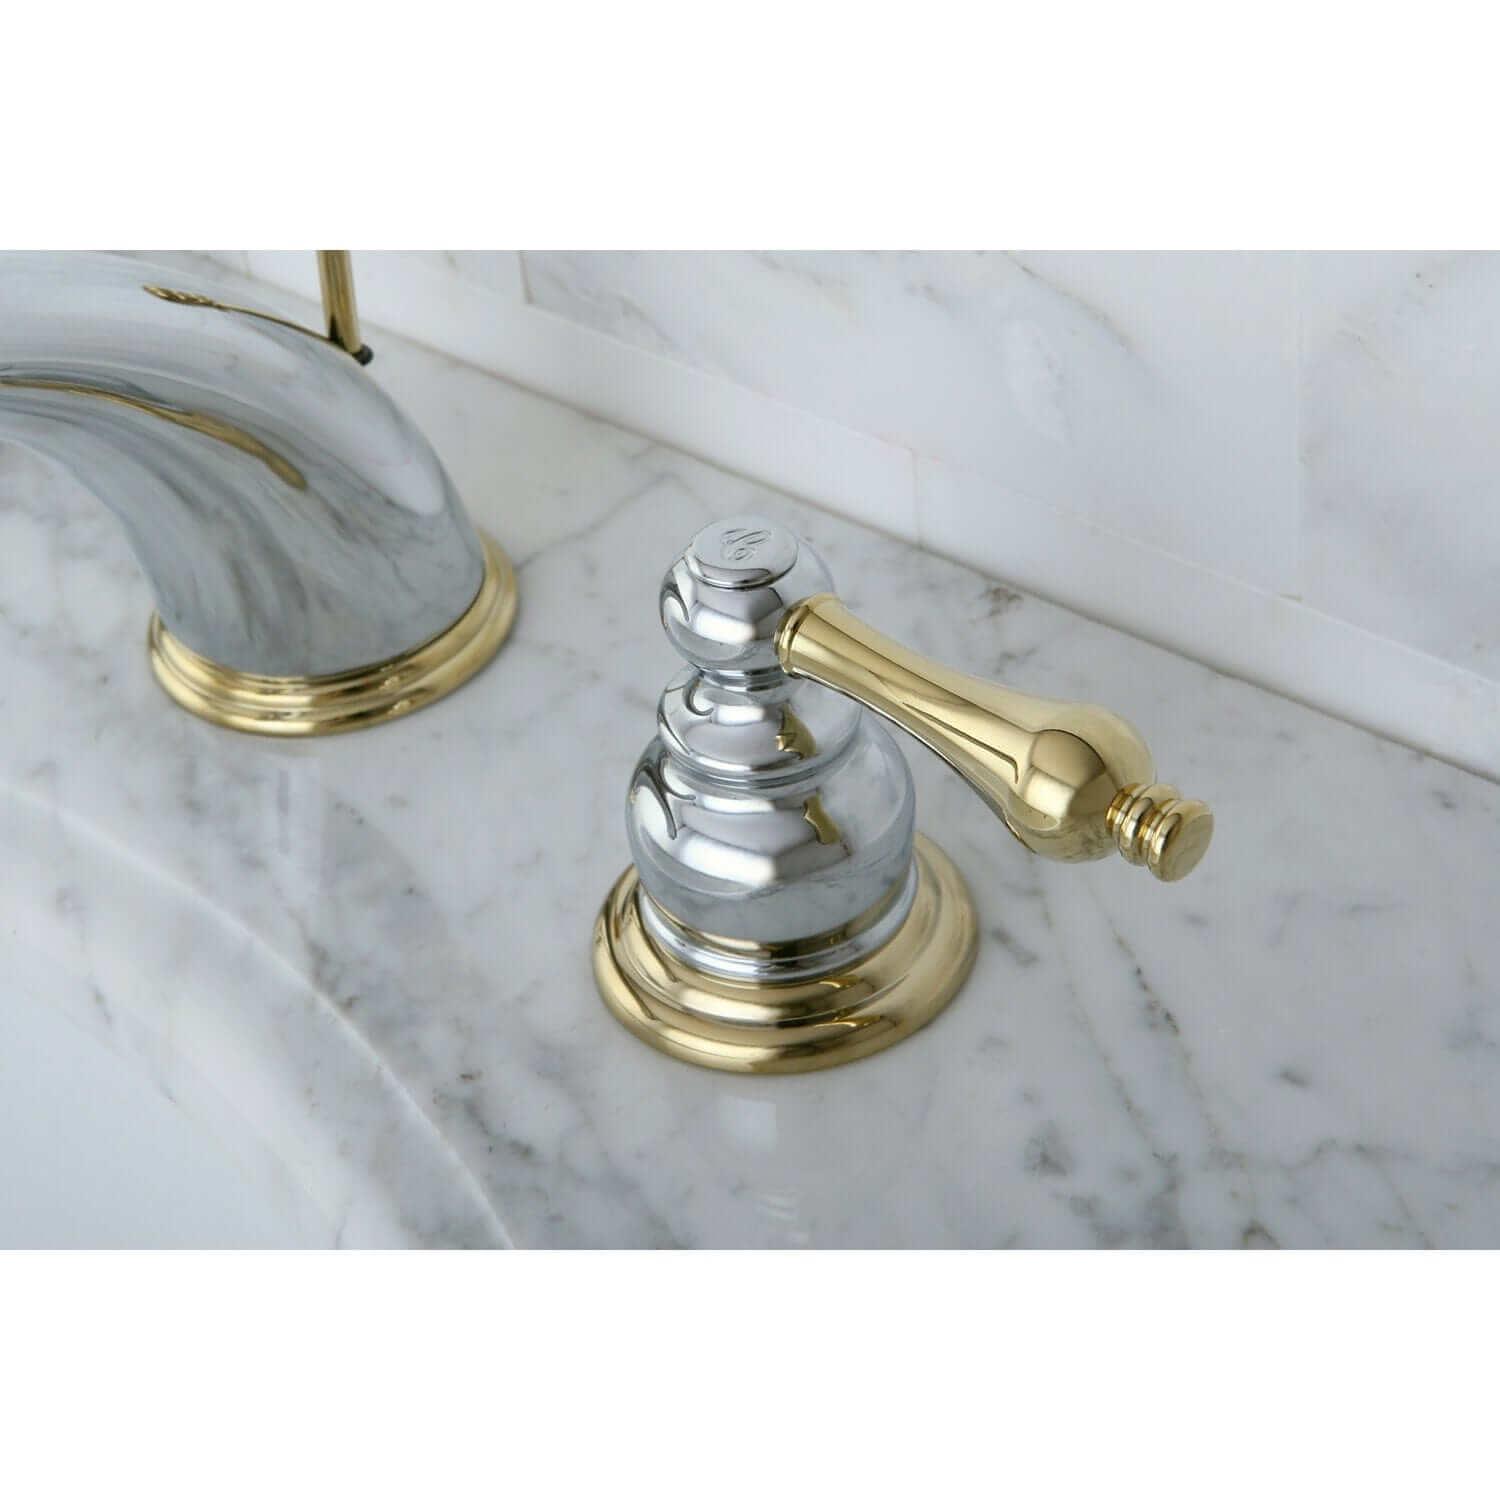 KINGSTON Brass Victorian Widespread Bathroom Faucet - Polished Chrome/Polished Brass